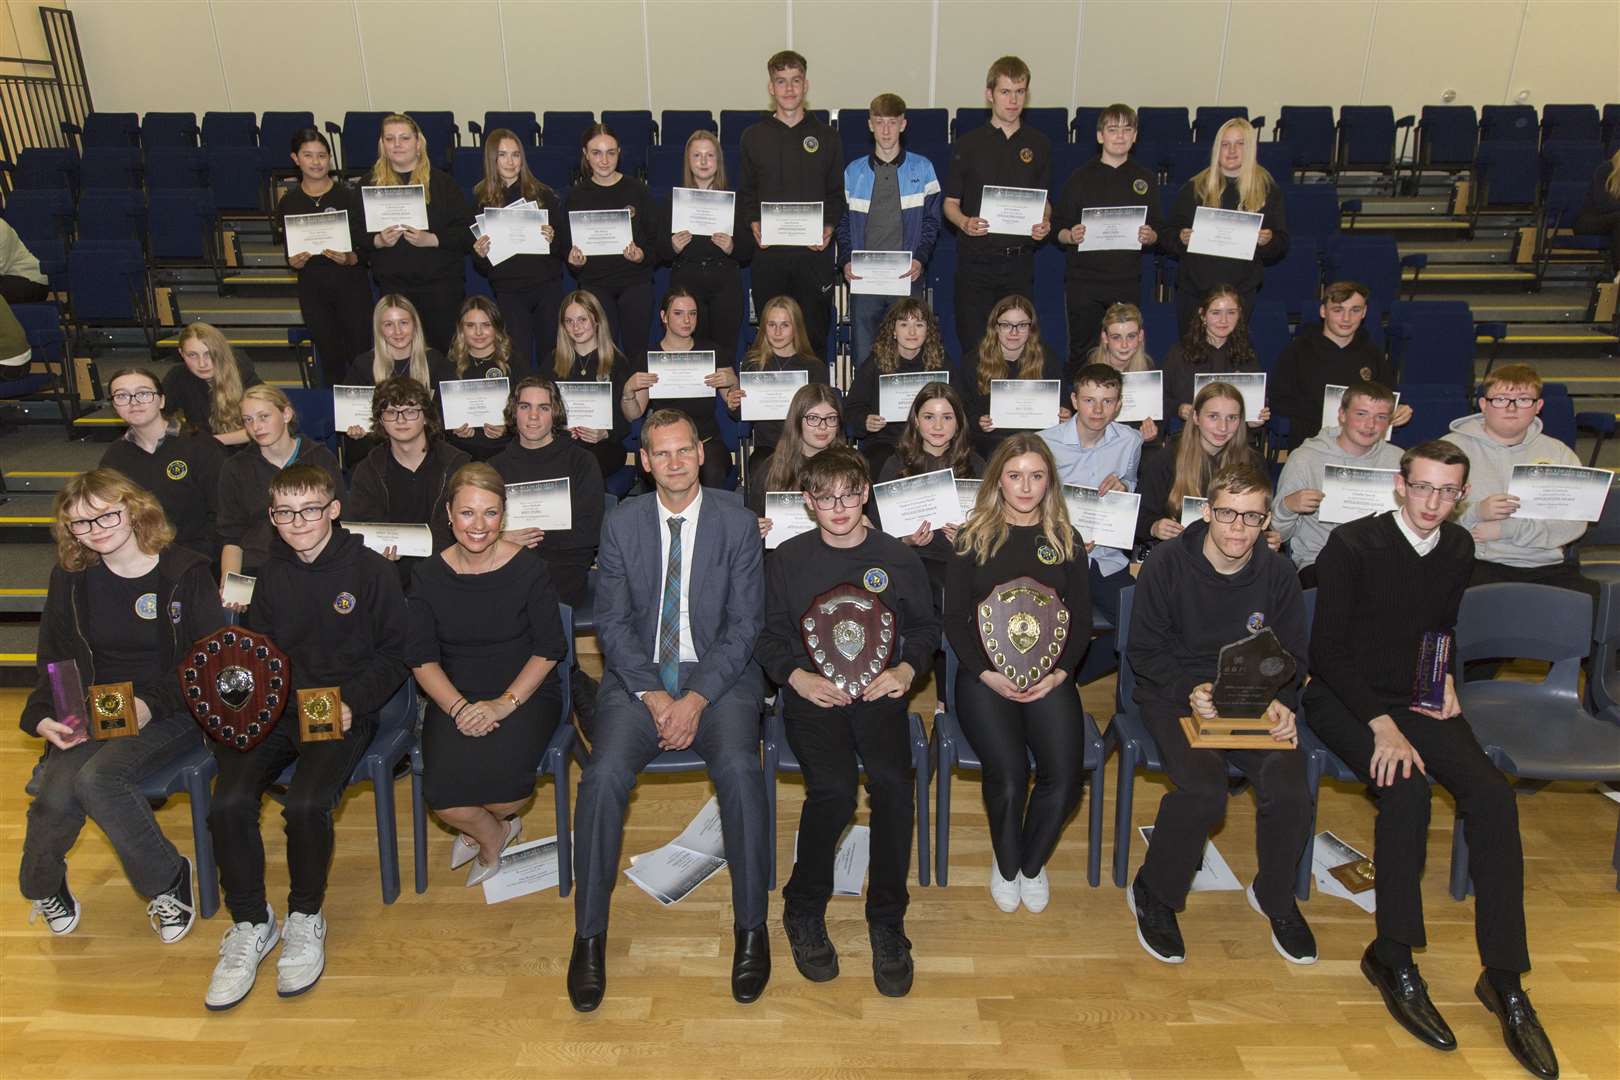 Some of Wick High School's prize and trophy winners from the past academic year pose for a group photograph along with head teacher Sebastian Sandecki and guest speaker Gail Ross. Picture: Robert MacDonald/Northern Studios